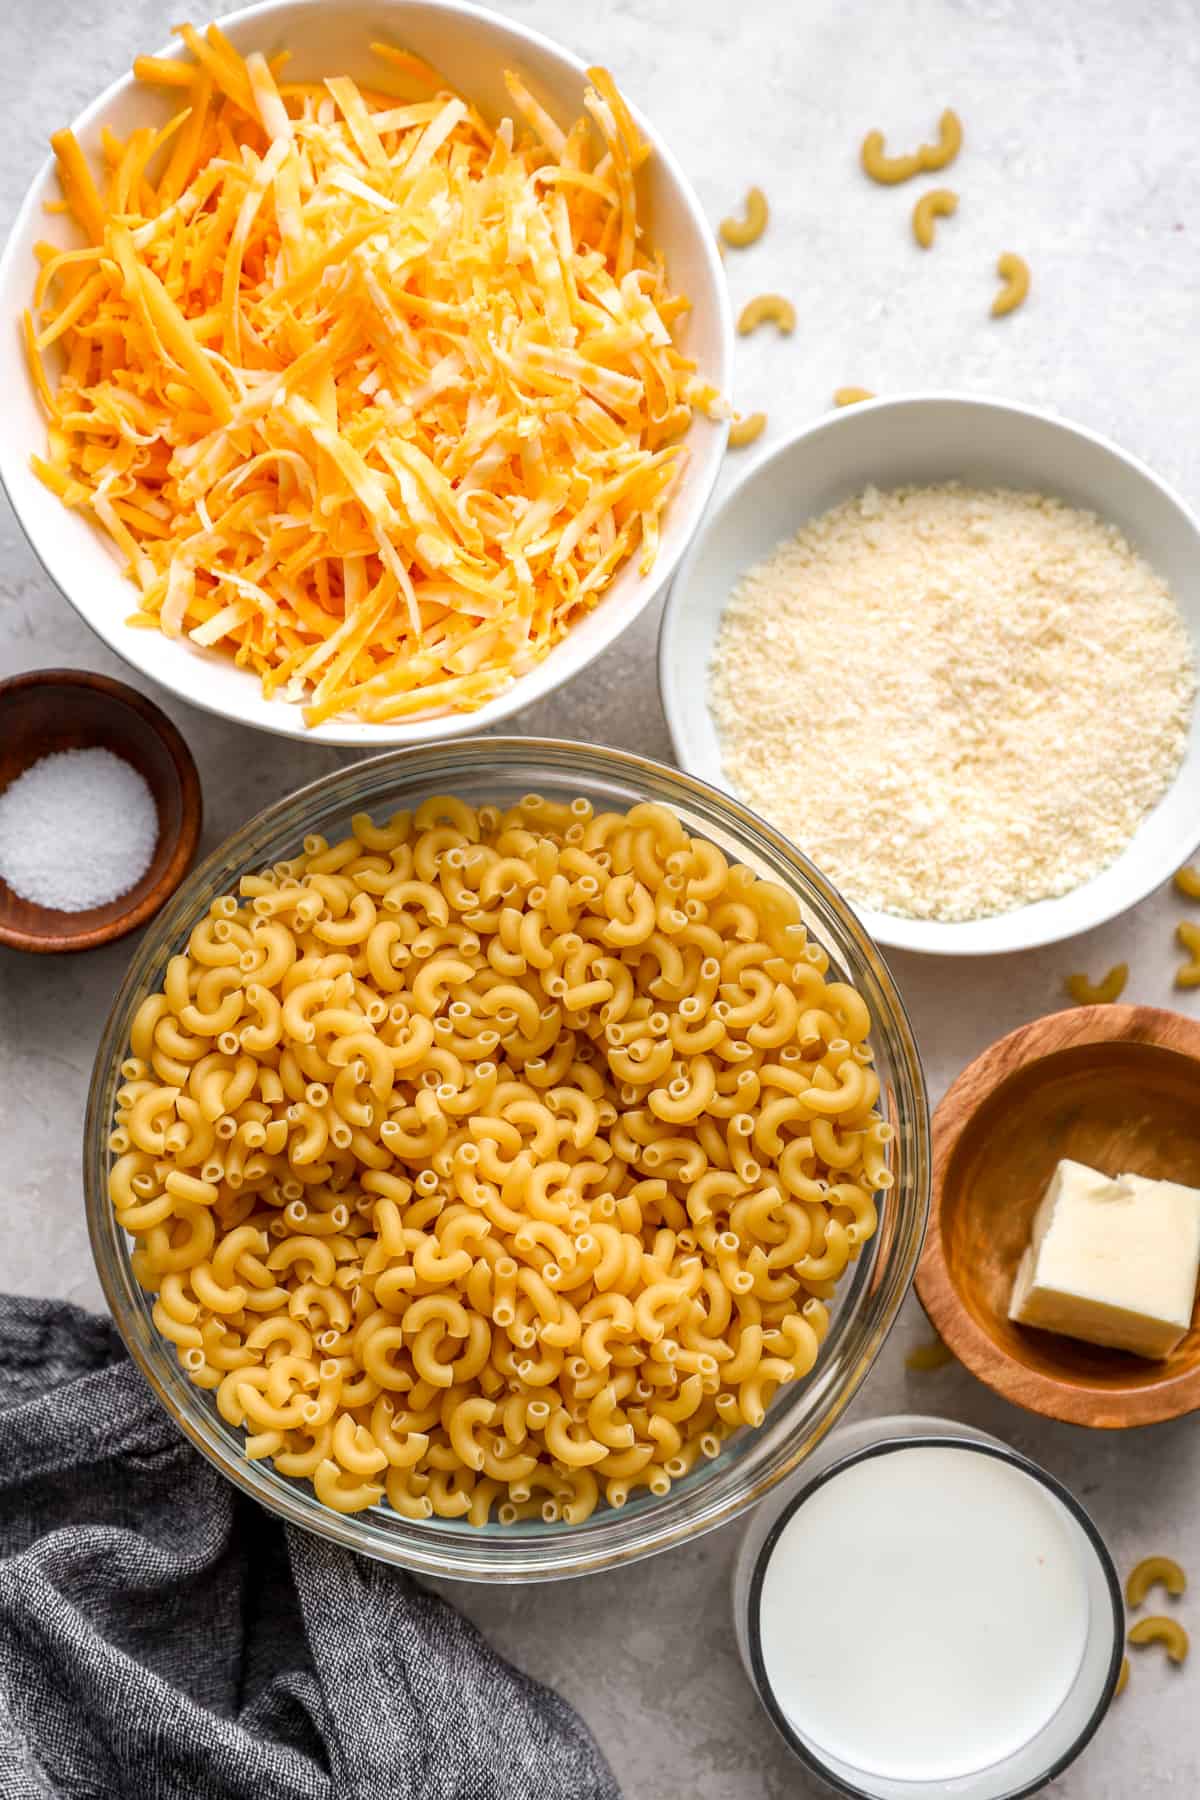 Ingredients for Instant Pot Mac and Cheese